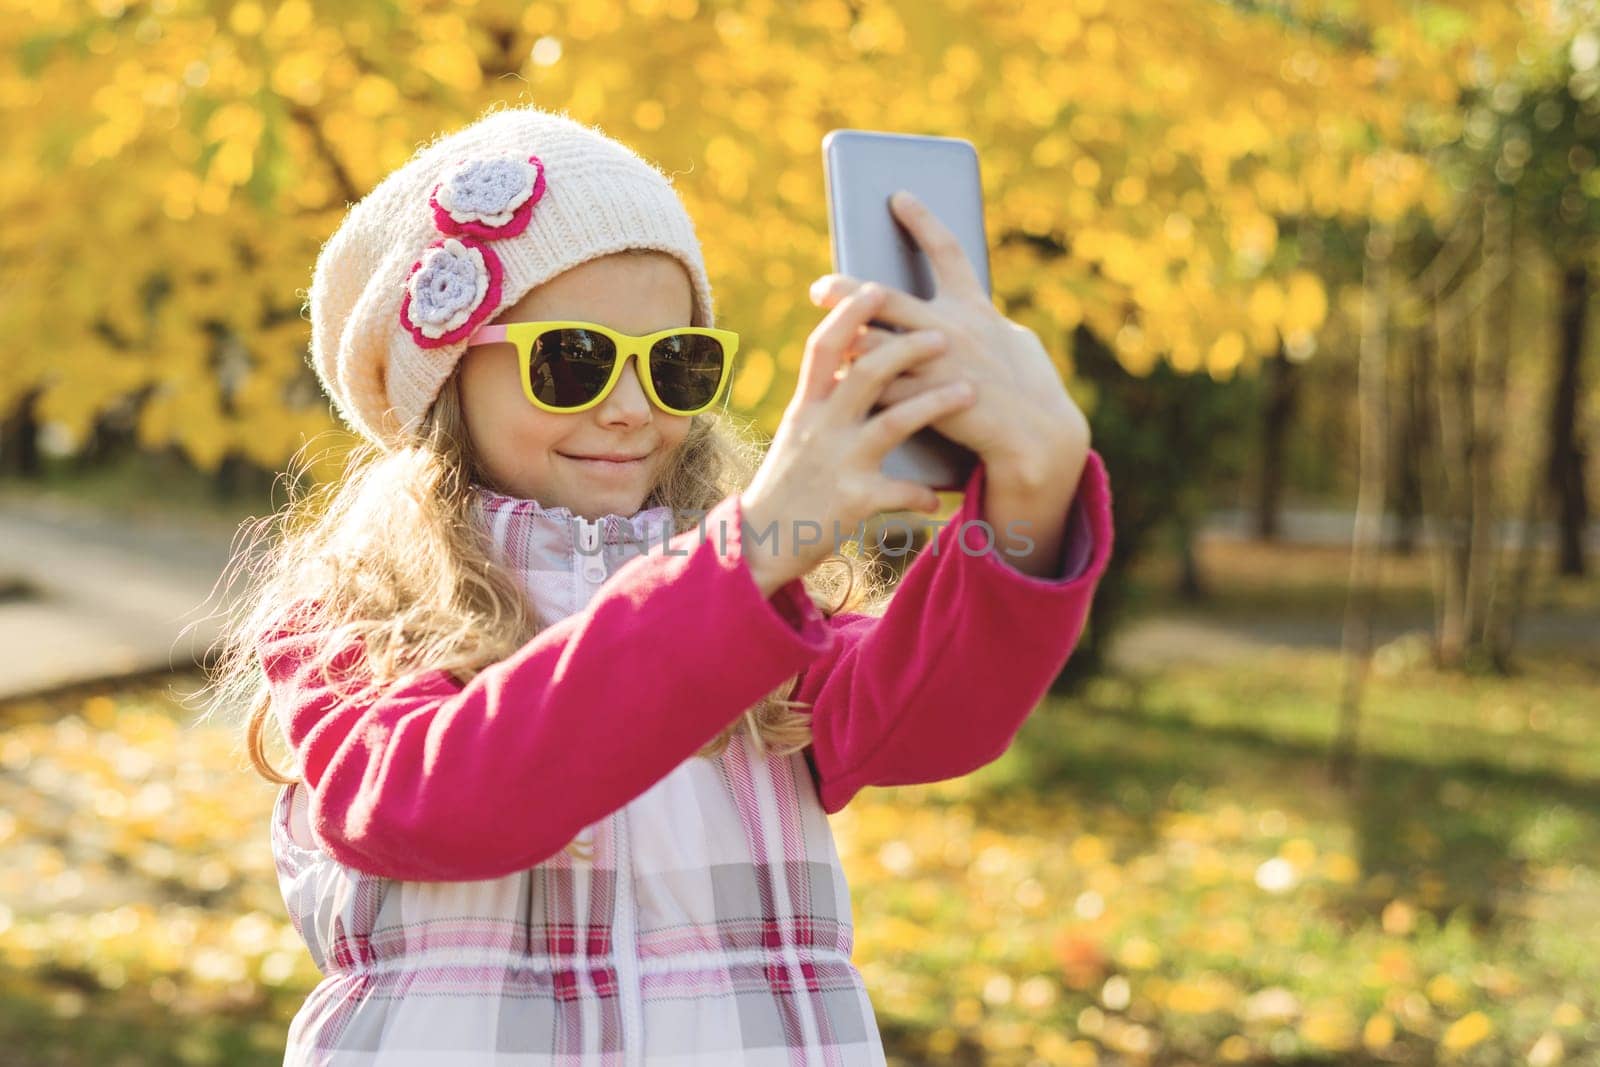 Pretty girl of 7 years doing selfie using smartphone, autumn background